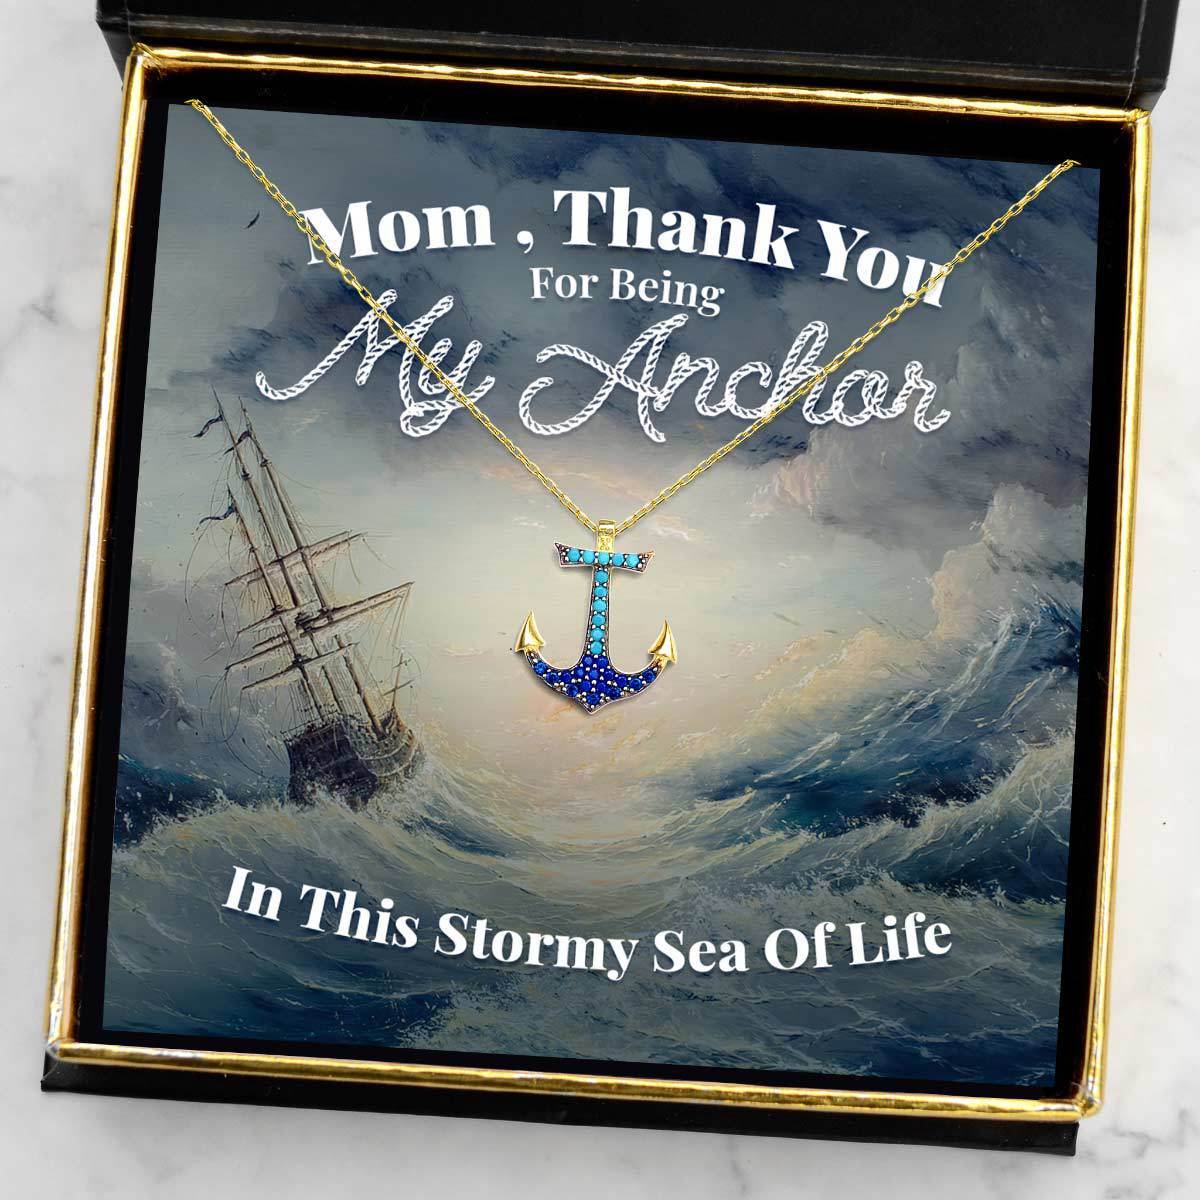 My Mom, My Anchor - Crystal Anchor Necklace Gift